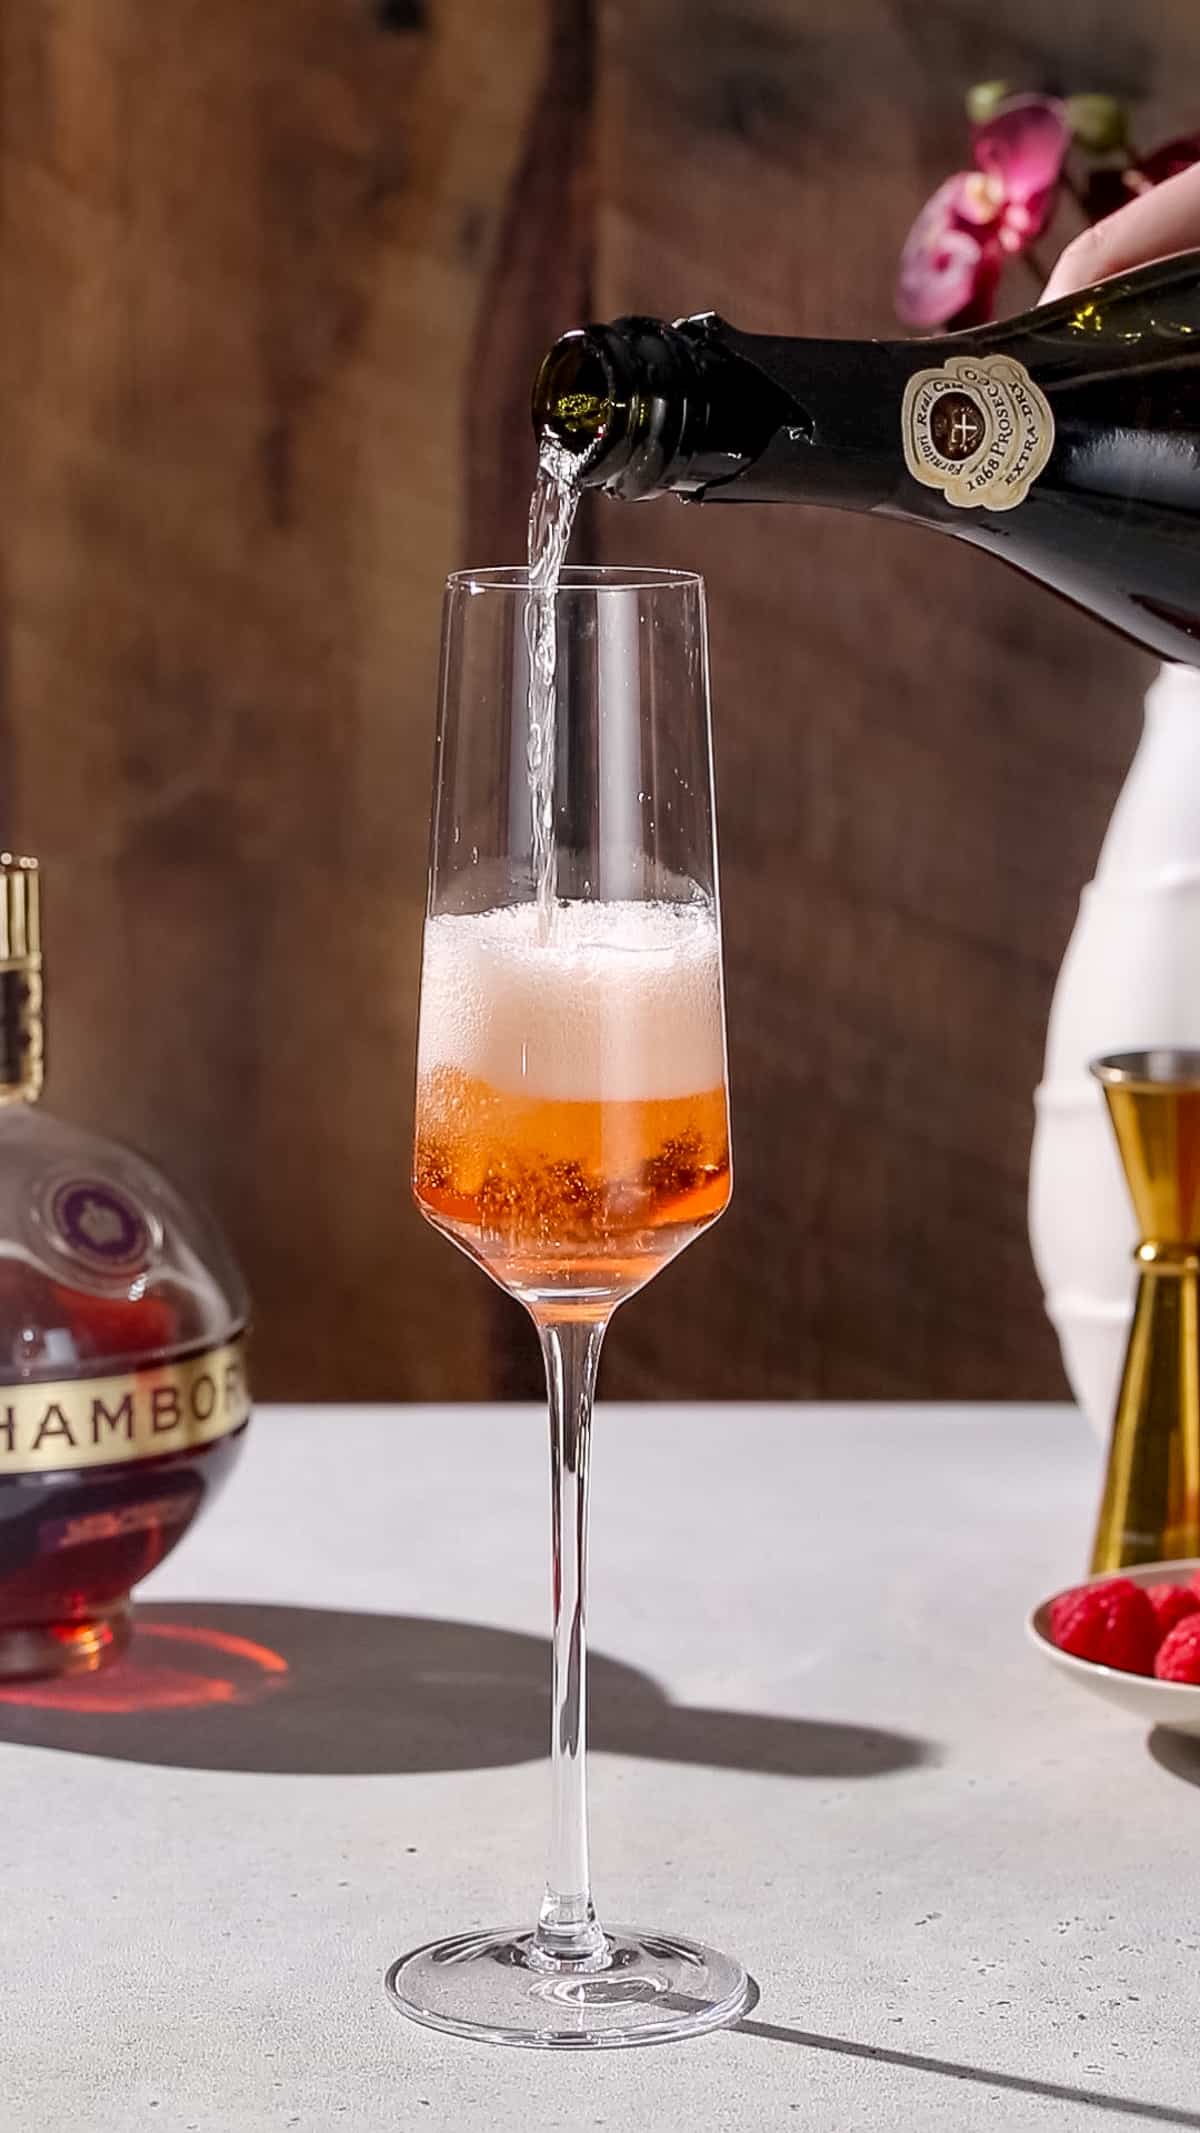 Hand pouring champagne into a champagne flute that also has chambord liqueur in it.